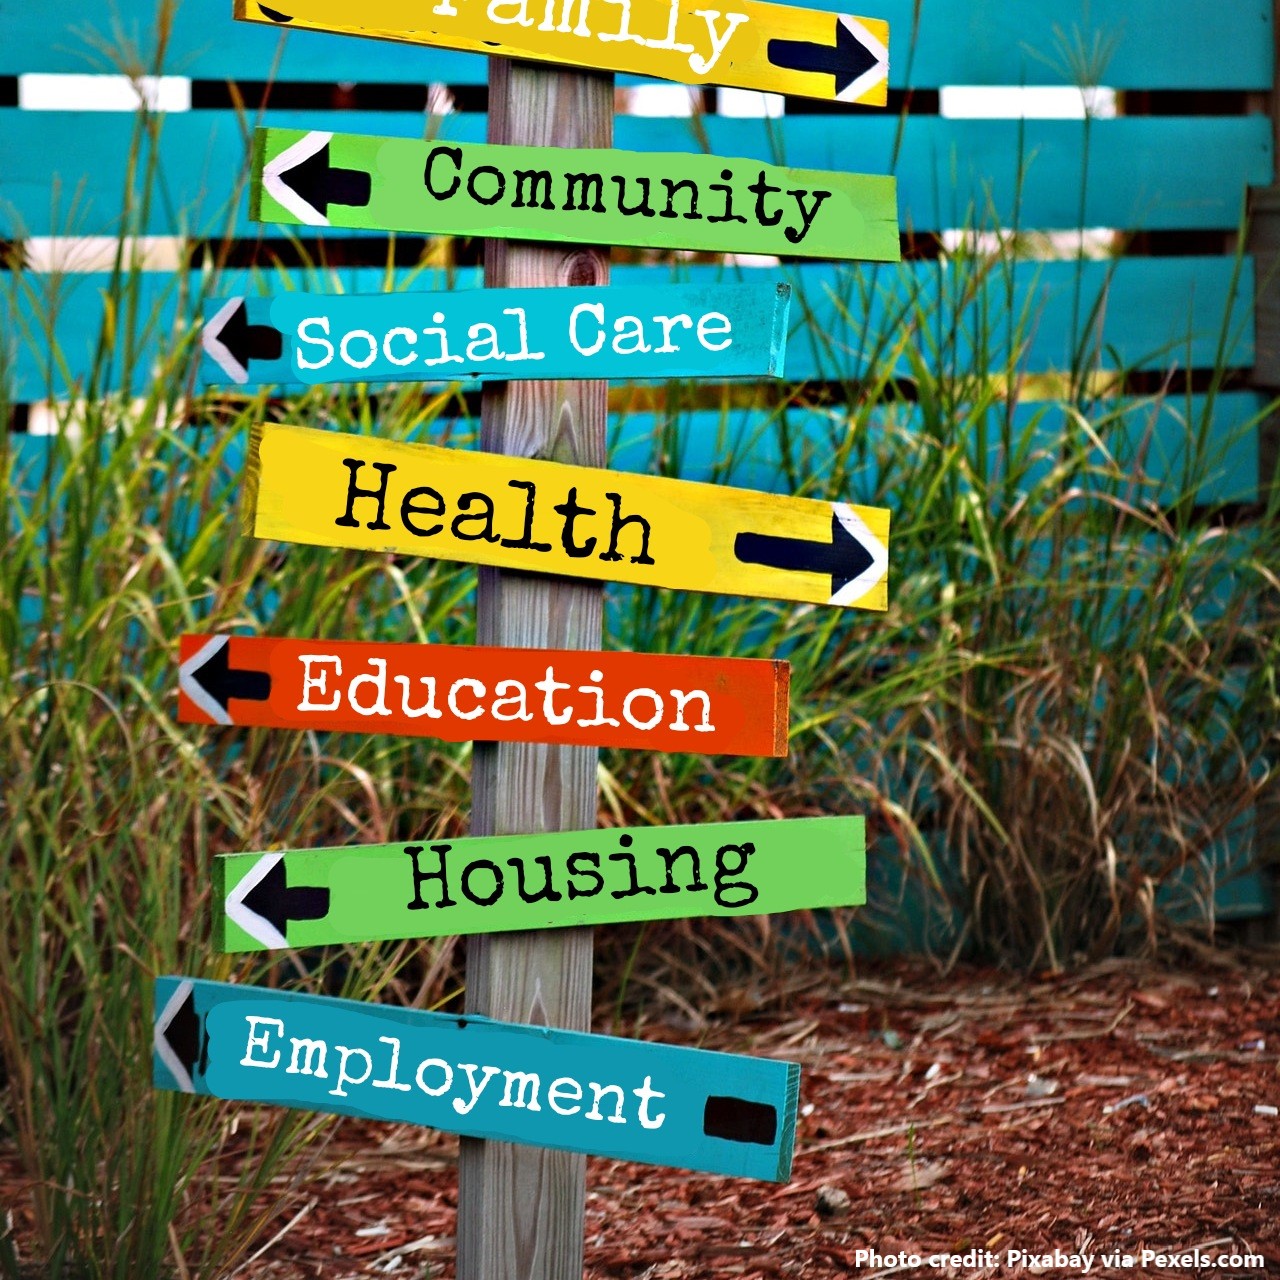 A wooden post planted on the ground with various boards attached showing arrows/directions for Family, Community, Social Care, Health, Education, Housing, and Employment. A metaphor for the Preparing for Adulthood journey of children and young people with SEND.